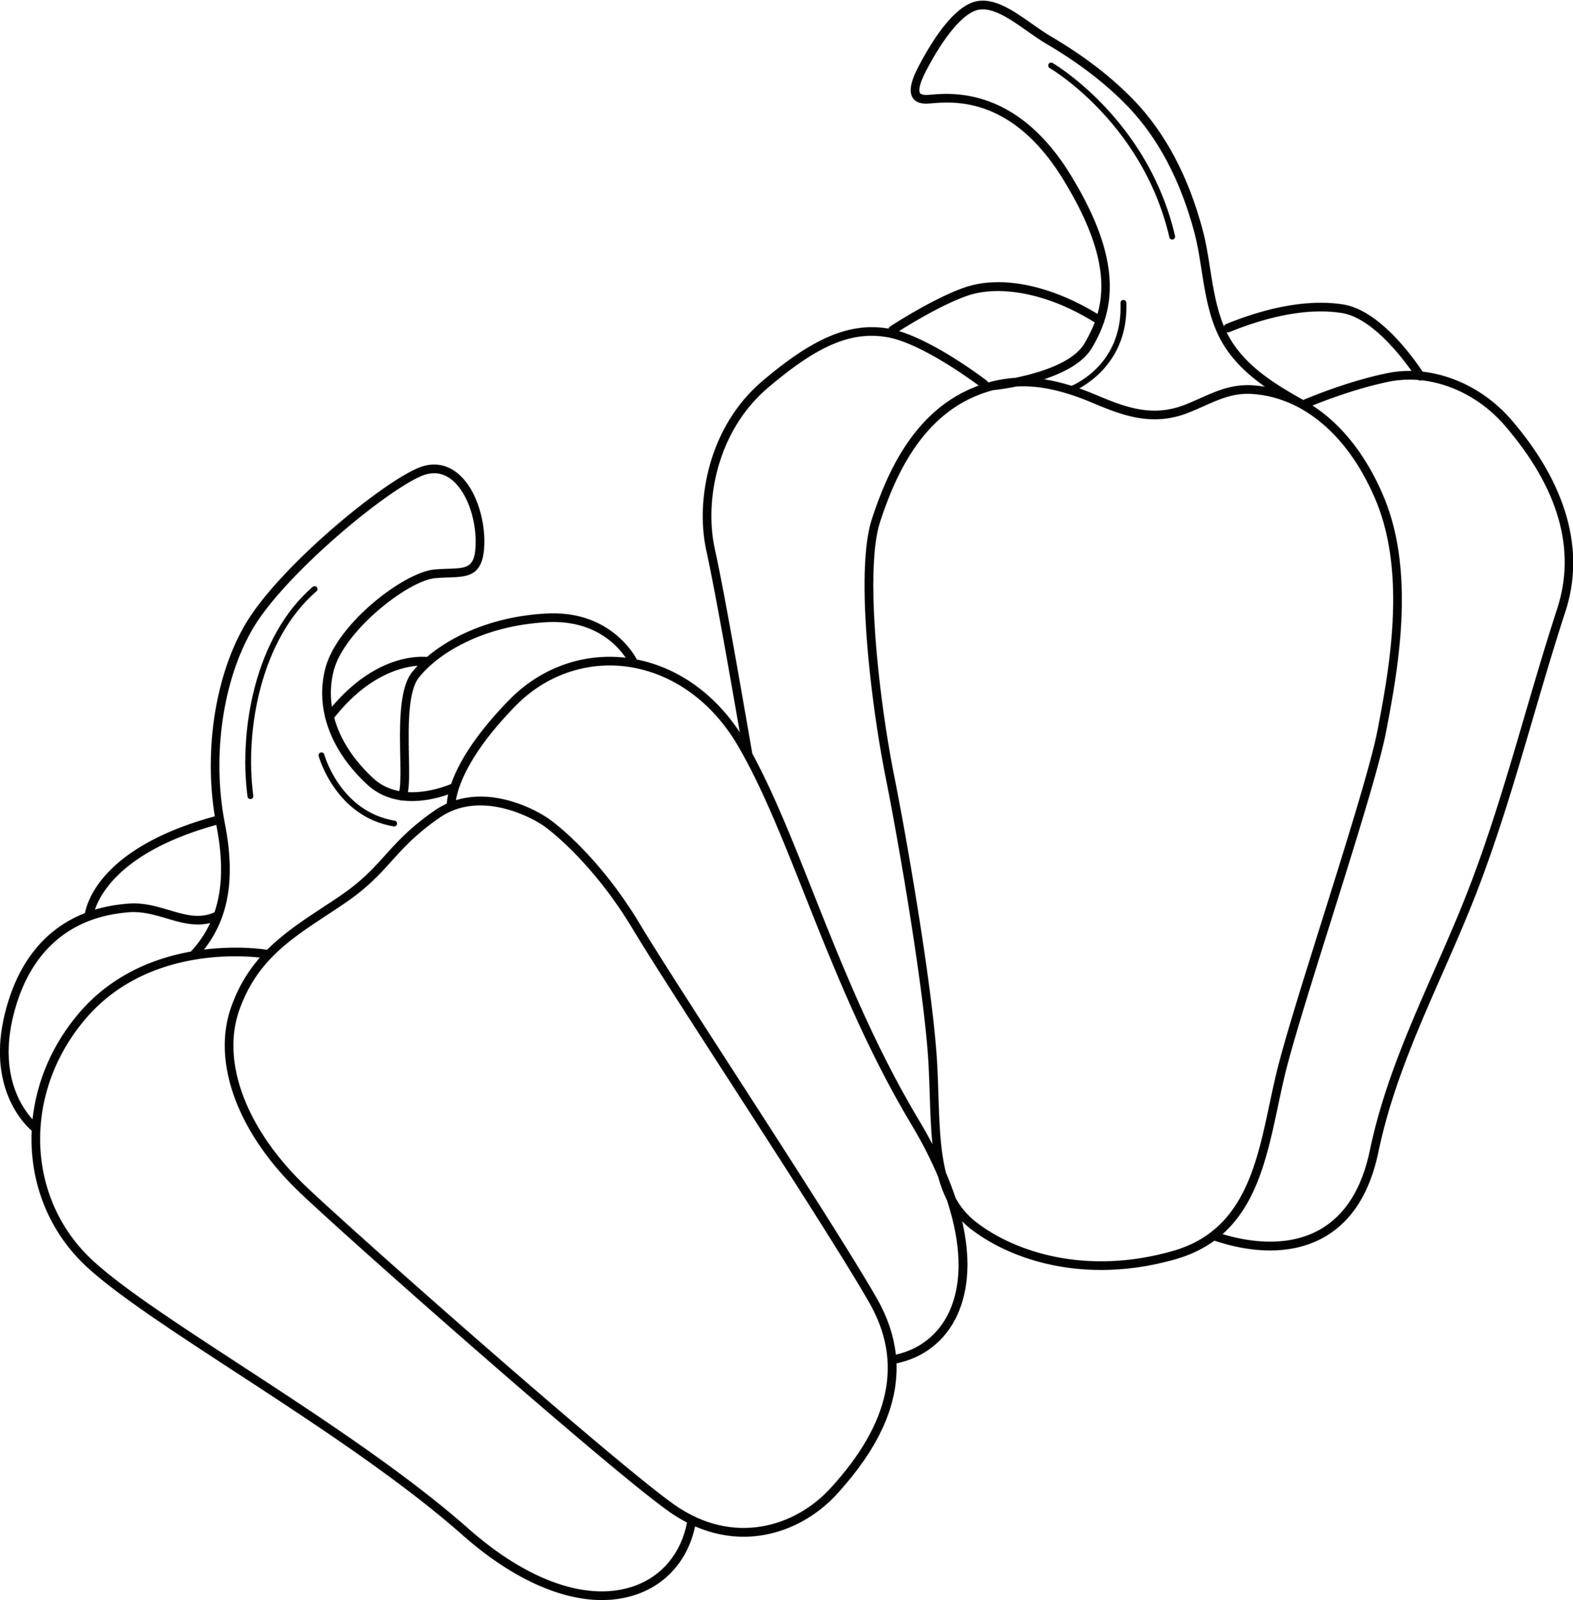 Bell Pepper Fruit Isolated Coloring Page for Kids by abbydesign